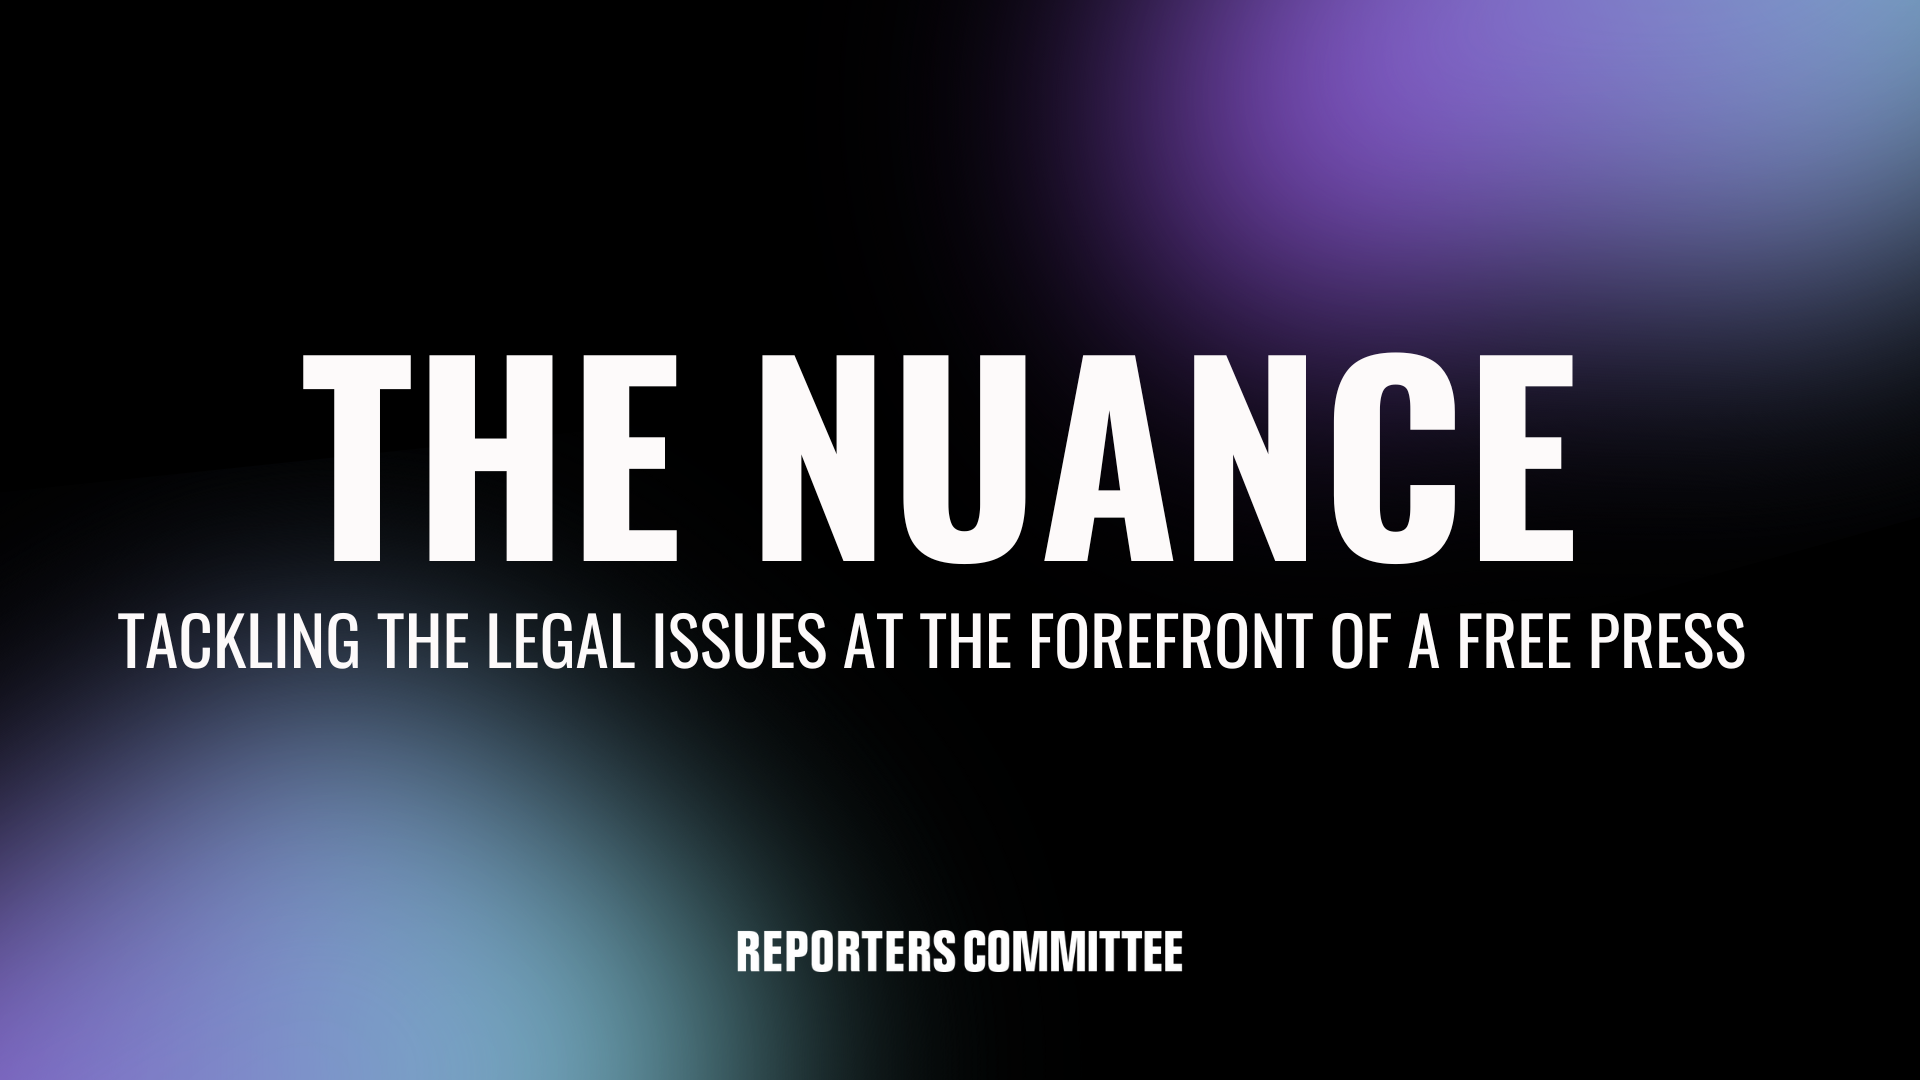 Title card for RCFP's The Nuance newsletter. Purple and black background with white text that reads: The Nuance: Tackling the legal issues at the forefront of a free press